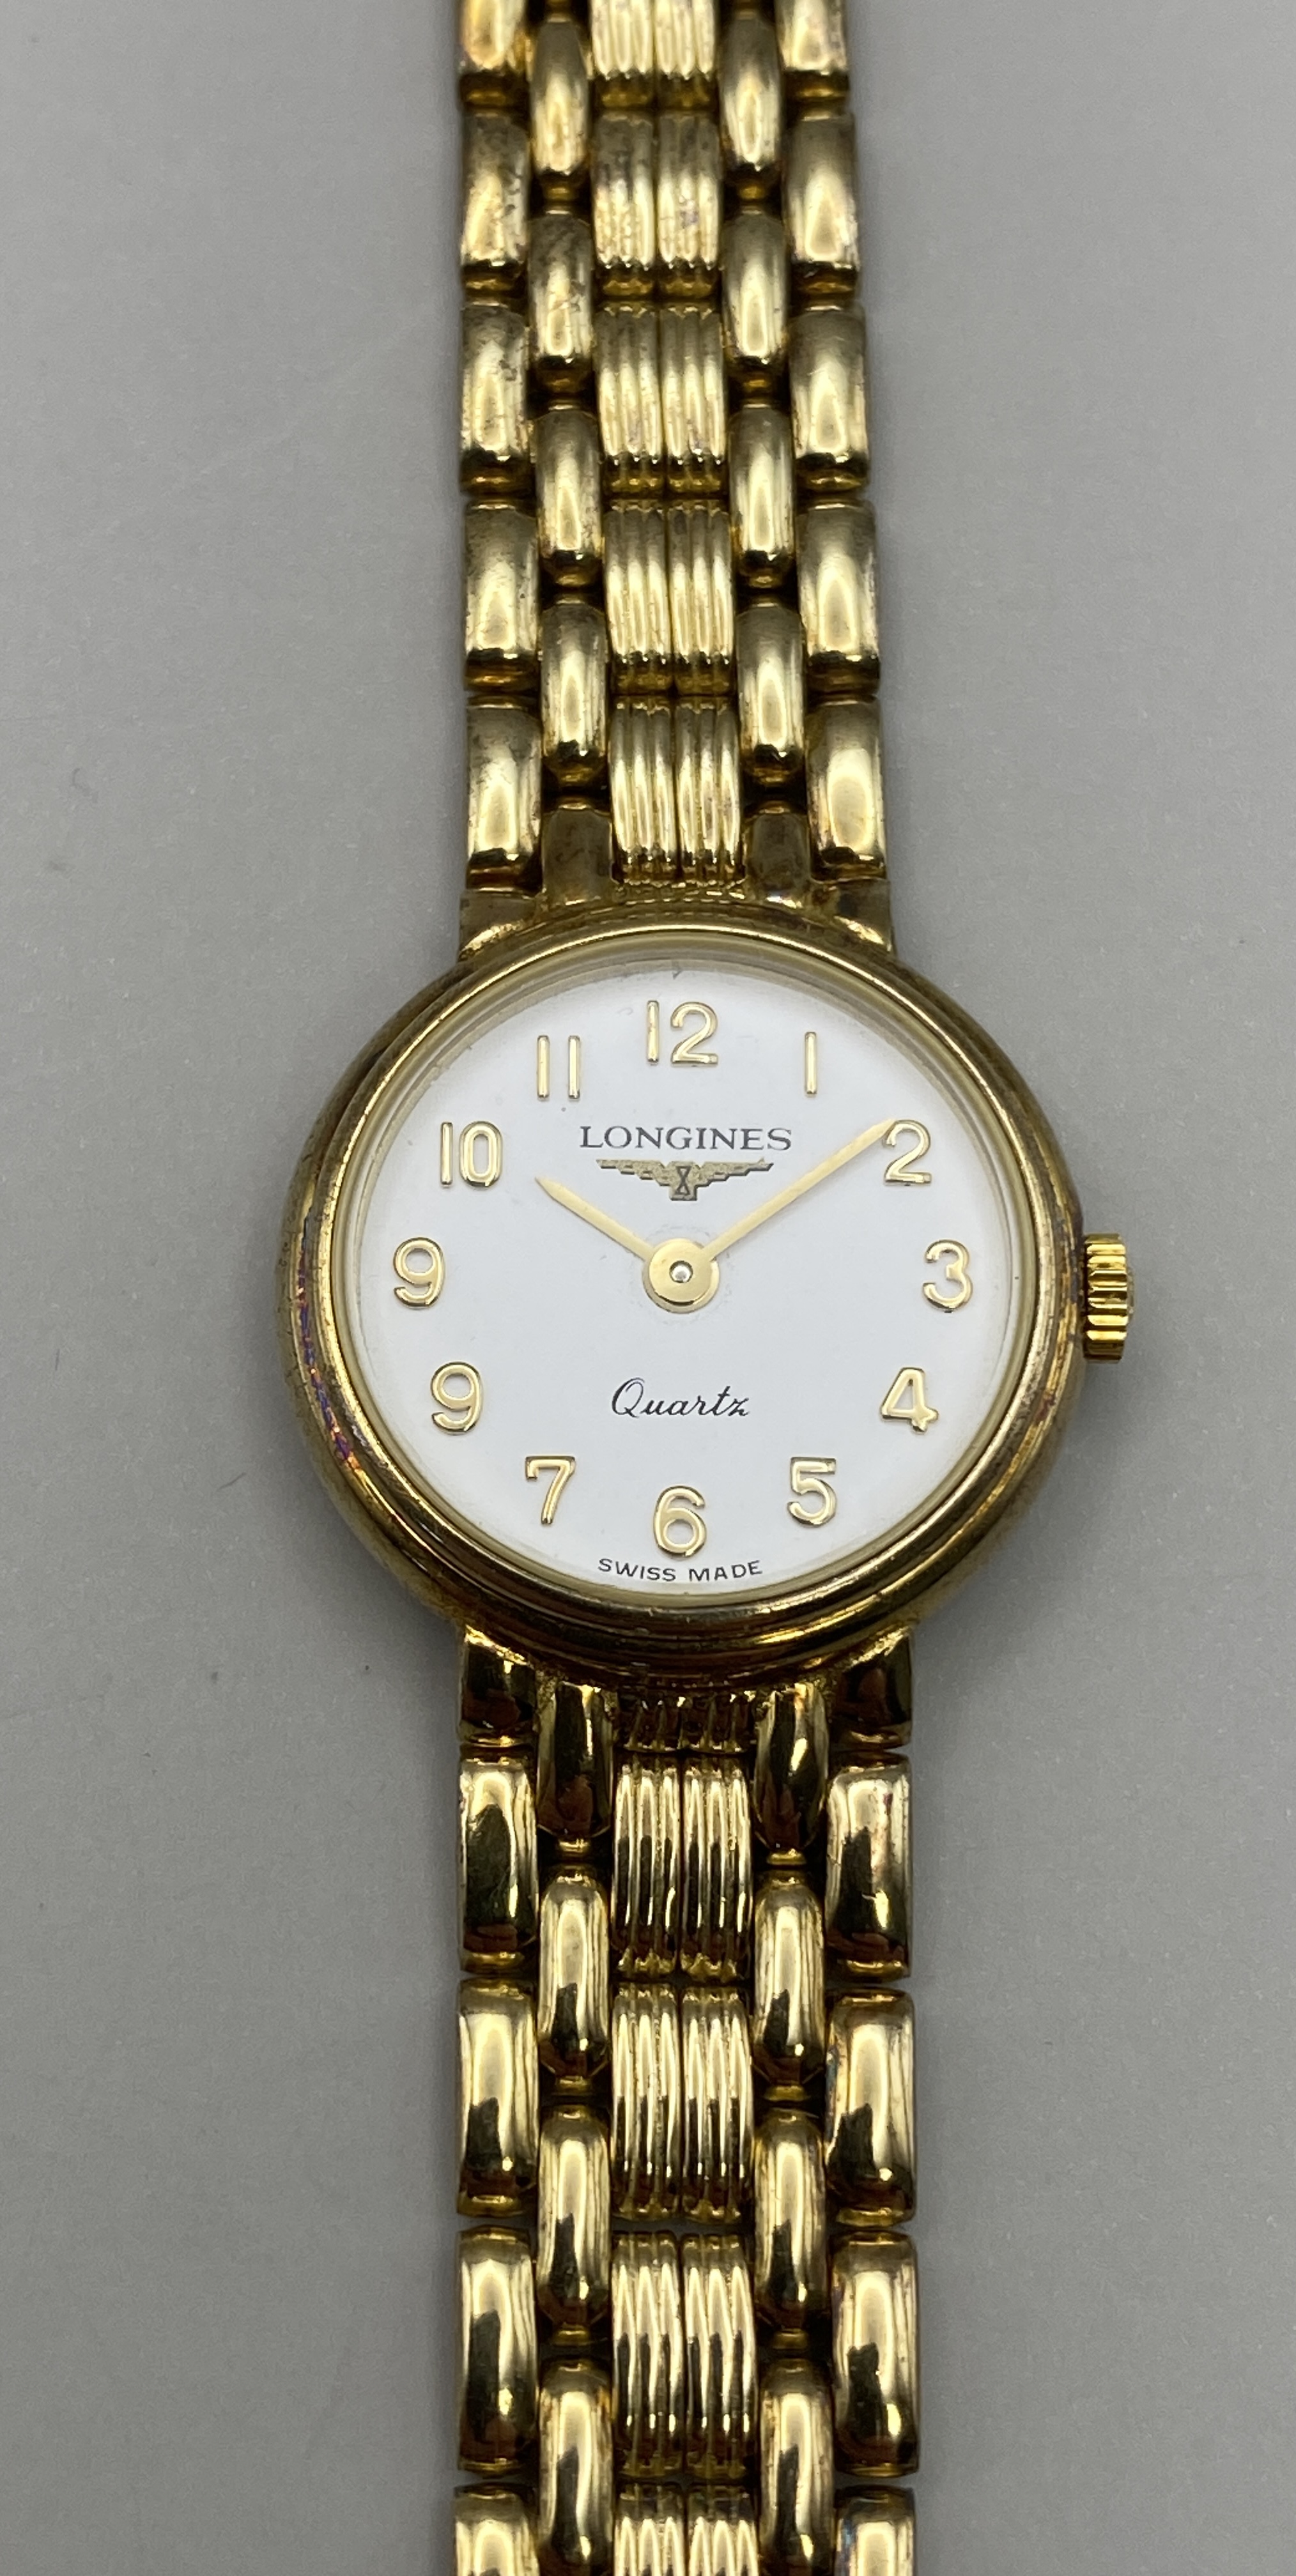 Lady's Longines 9ct Gold Bracelet Dress Watch with unusual clock face showing 2 x'9' instead of '8' - Image 6 of 14